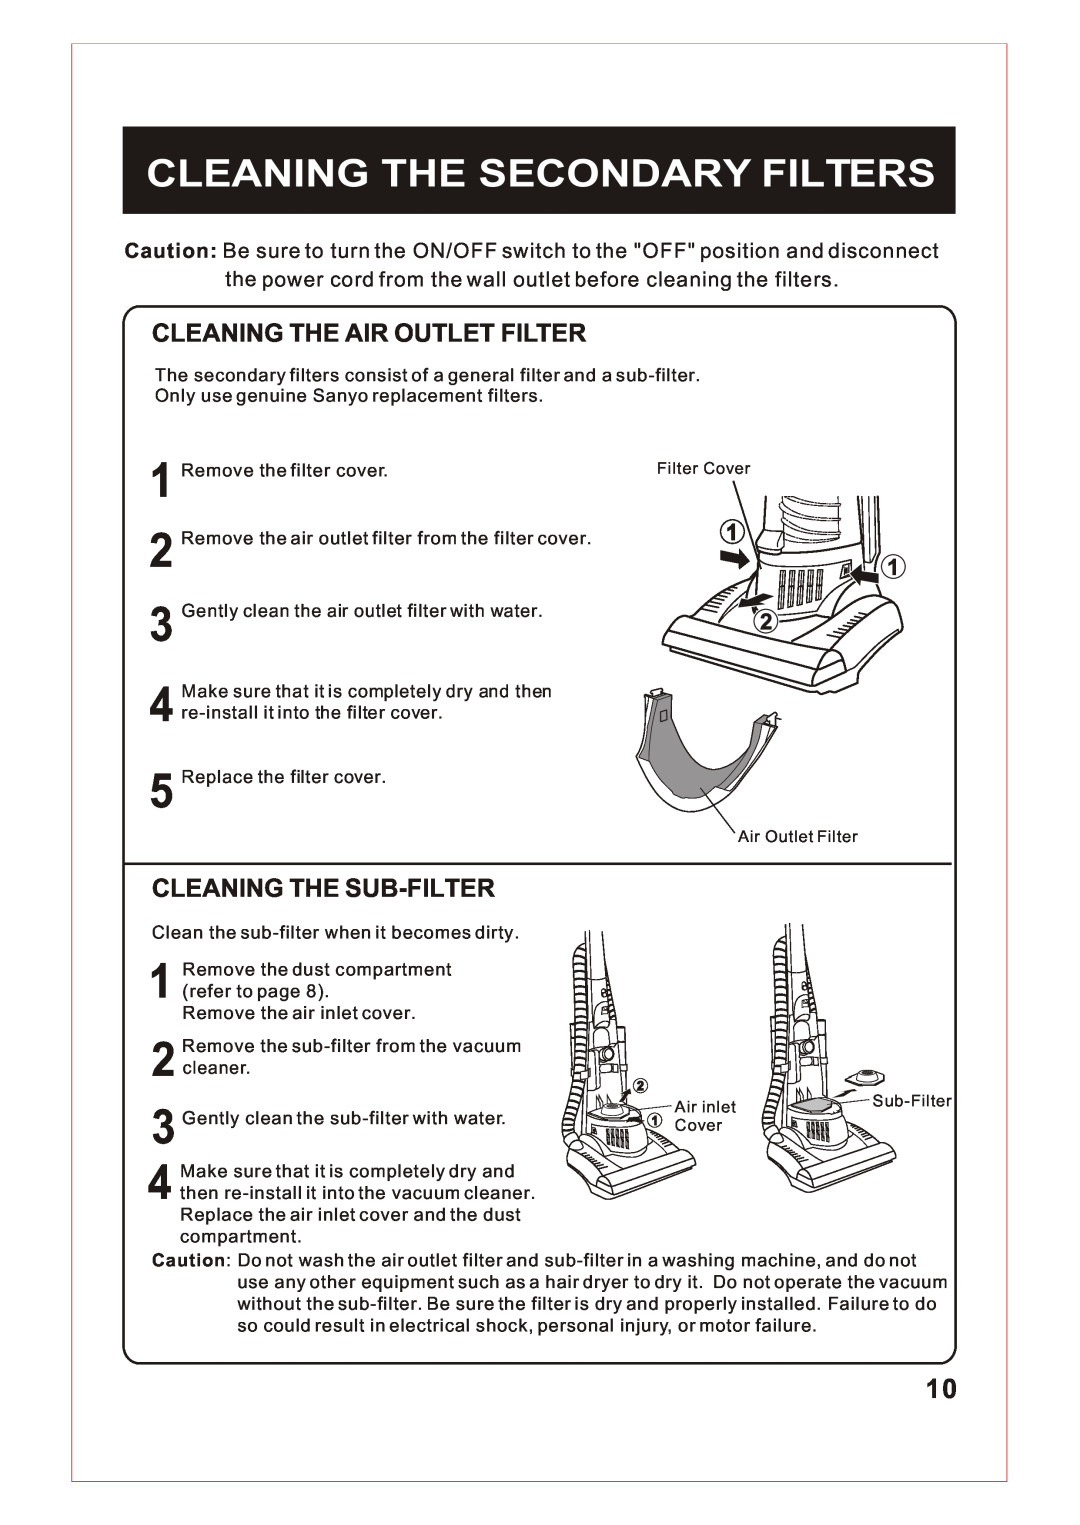 Sanyo SC-X90 instruction manual Cleaning The Secondary Filters, Cleaning The Air Outlet Filter, Cleaning The Sub-Filter 